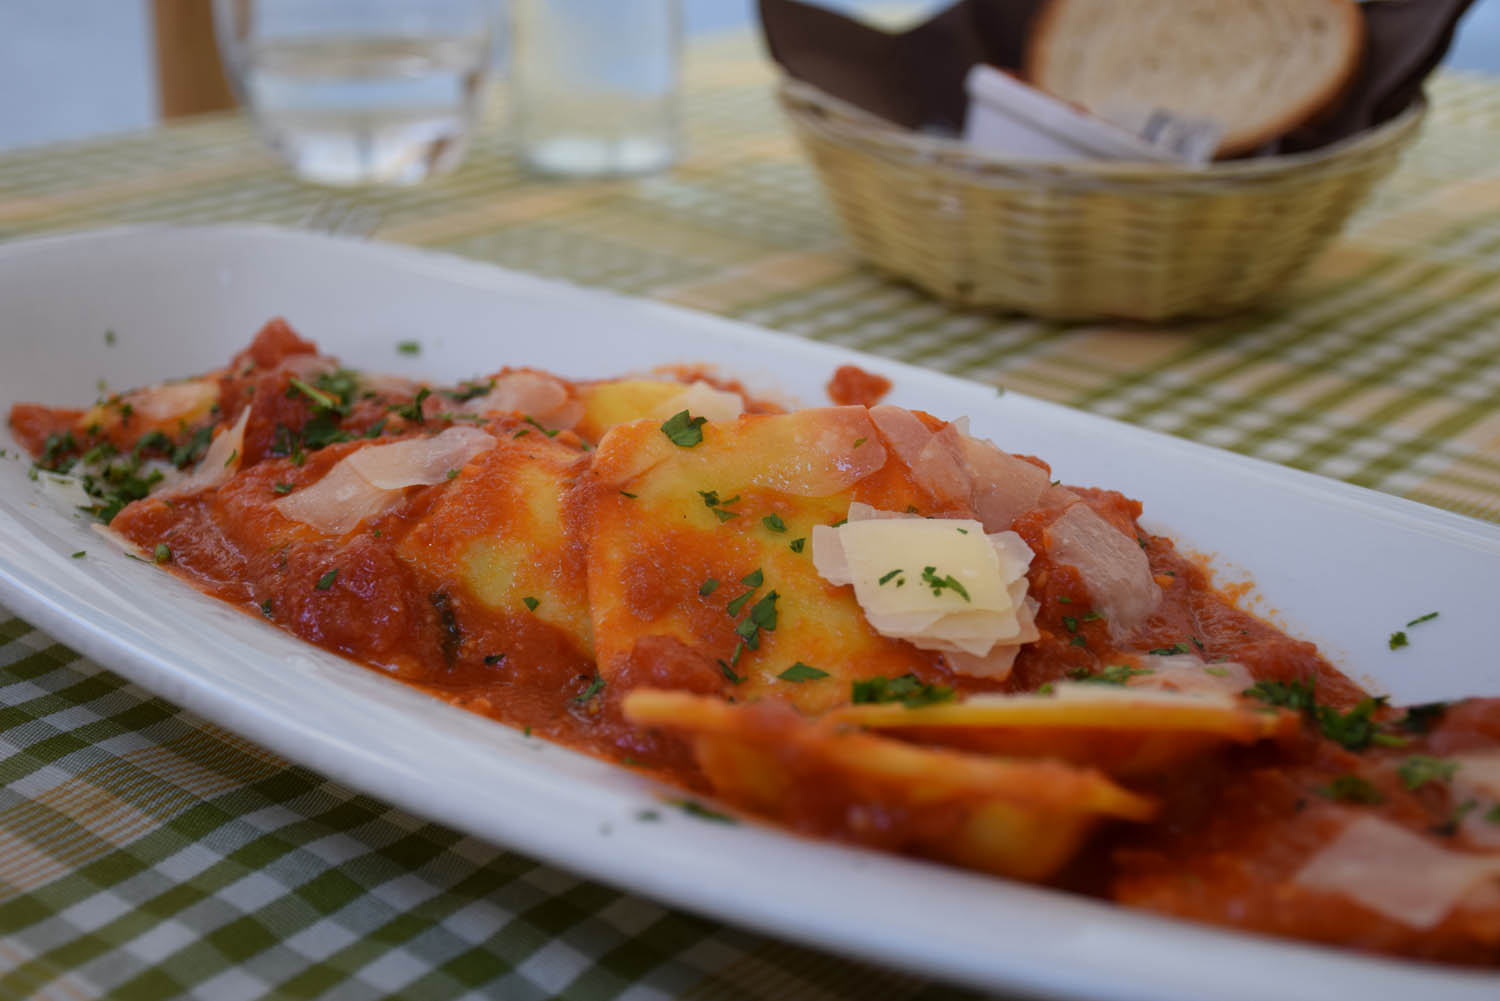 My dish: Raviolis stuffed with goat's cheese - traditional from Malta